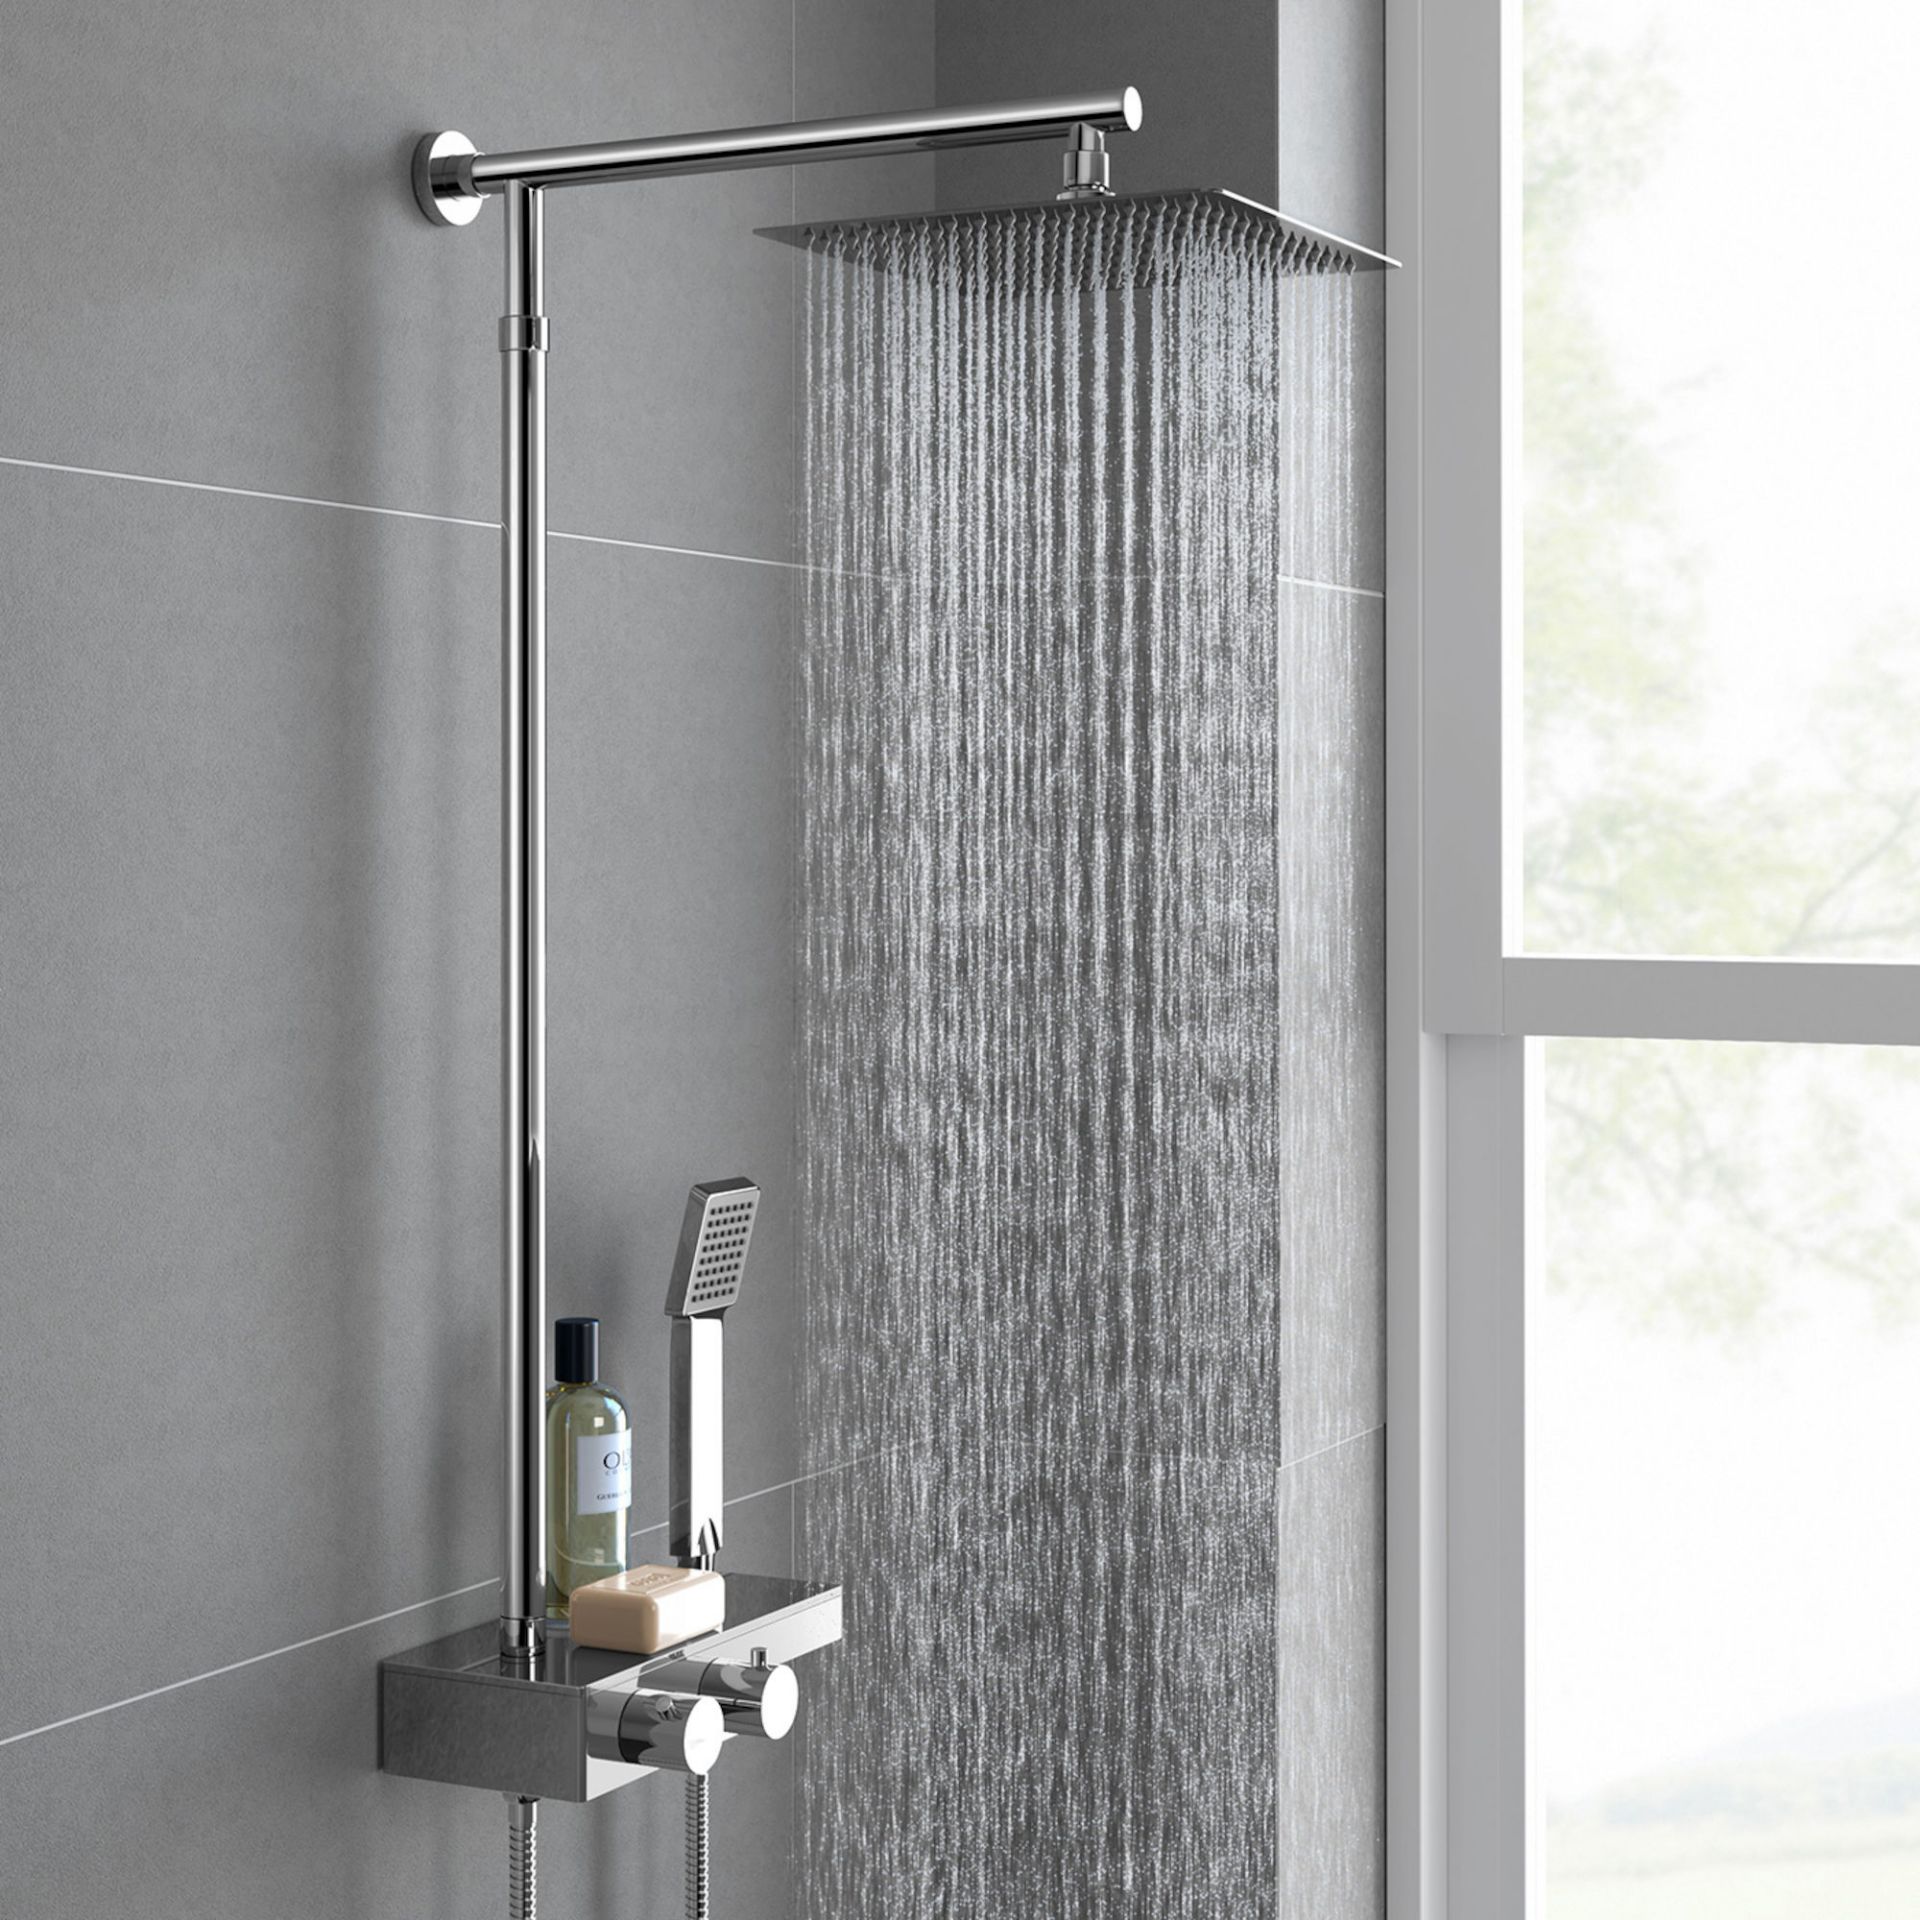 (XL131) 250mm Thermostatic SafeTouch Buildup Rain Shower Set Chrome Square - 25 cm - With Hand ...( - Image 3 of 3